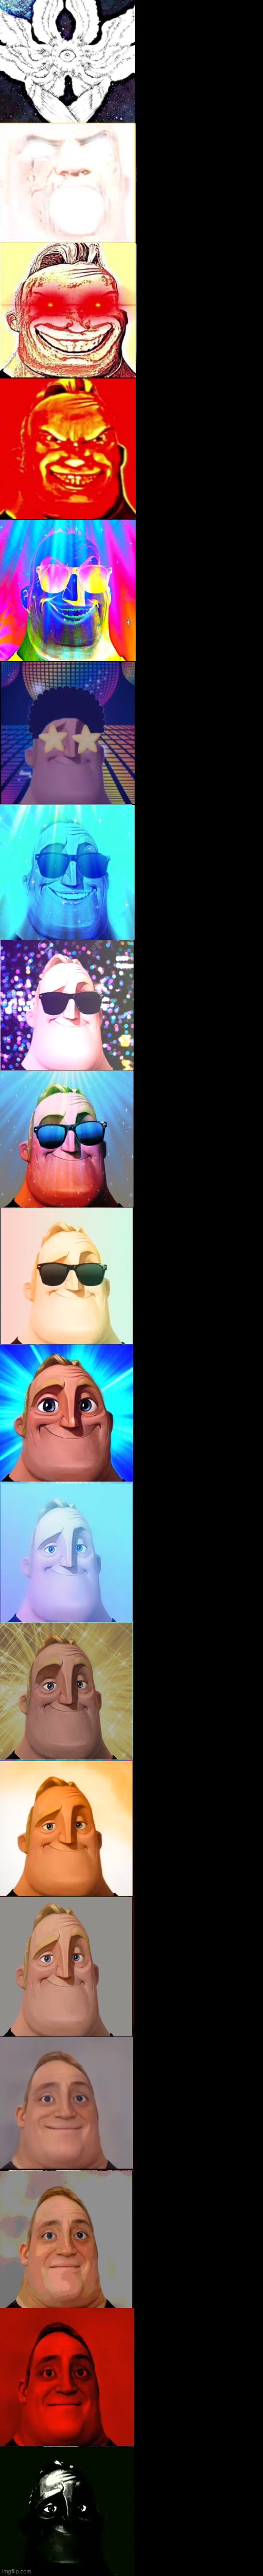 ReubenBrooksIsBack, Will you make this or I will make it? | image tagged in mr incredible becoming uncanny | made w/ Imgflip meme maker